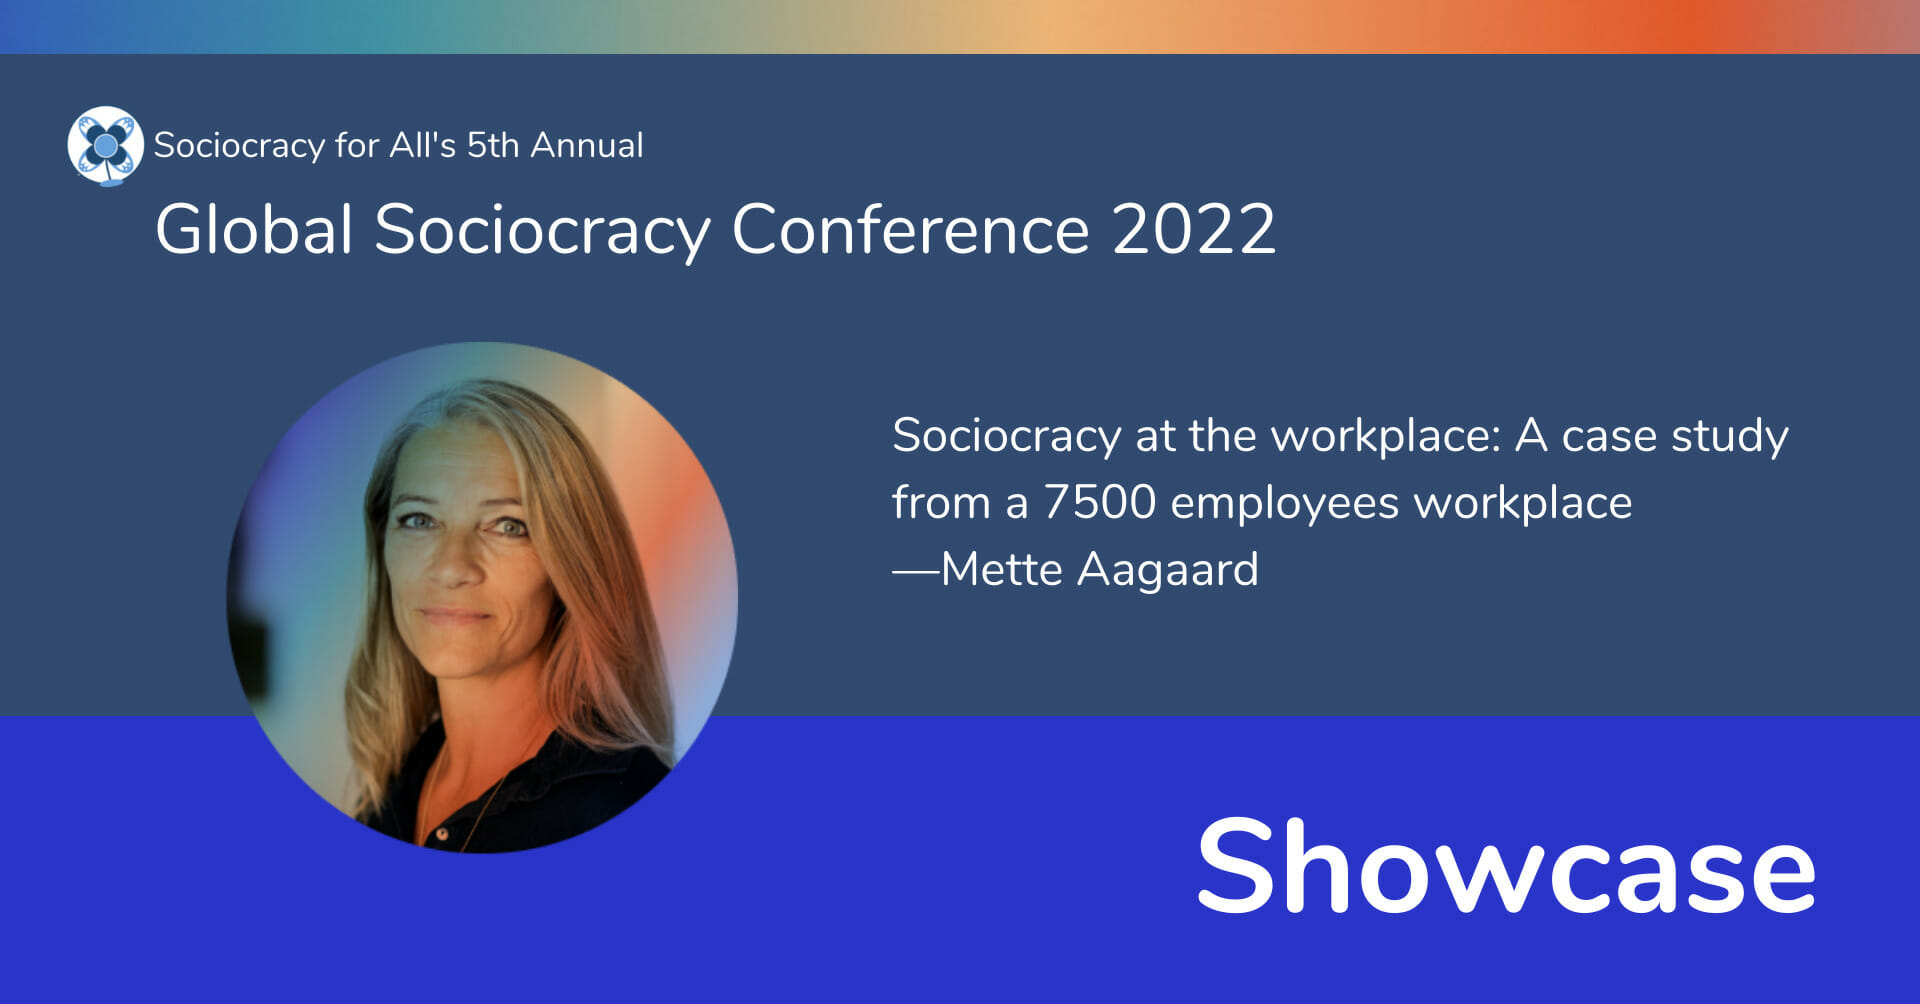 Sociocracy at the workplace: A case study from a 7500 employees workplace —Mette Aagaard, Q&A with Jesper Rasmussen